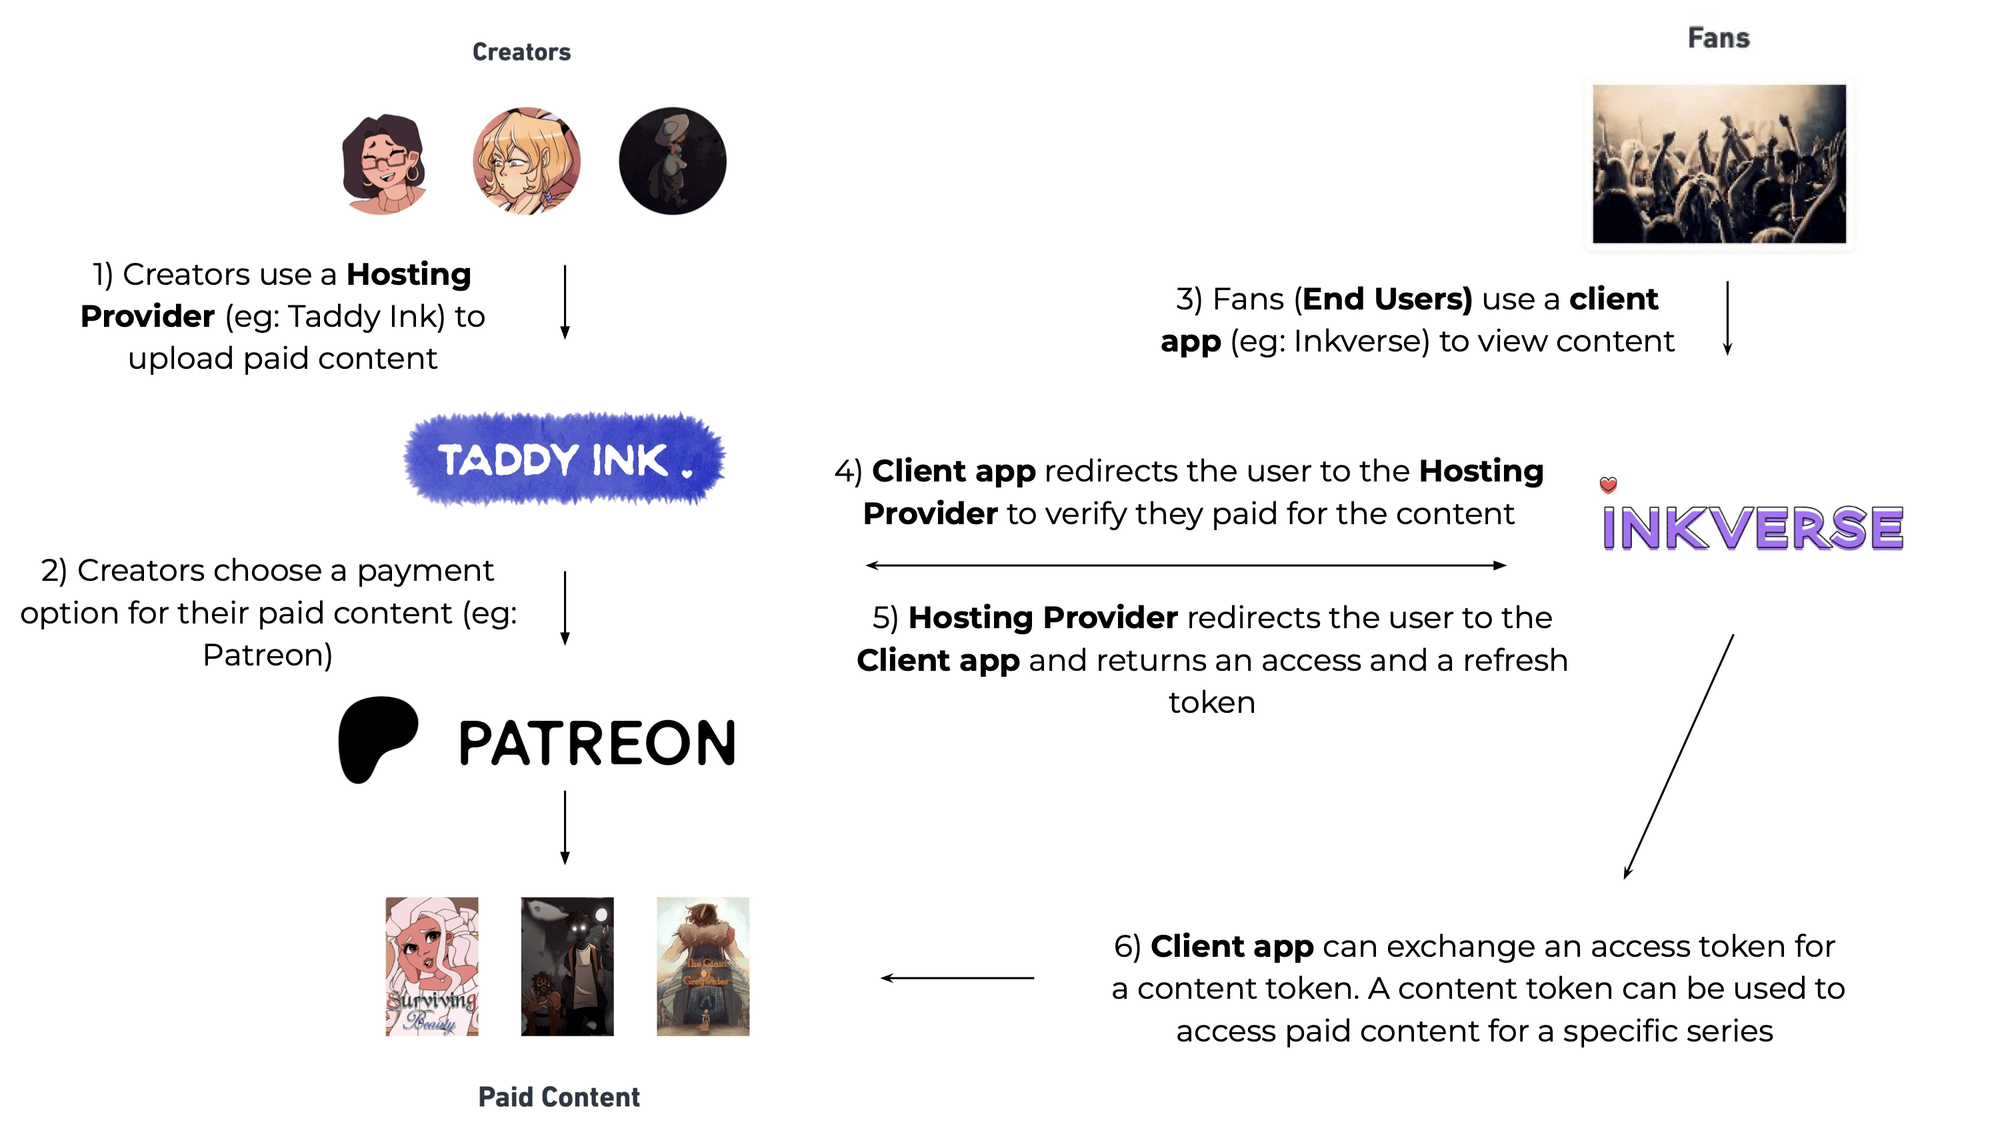 Taddy Ink (Hosting Provider) and Inkverse (Client App) are used as examples but can be replaced with any alternative conforming to the SSS open specification. 